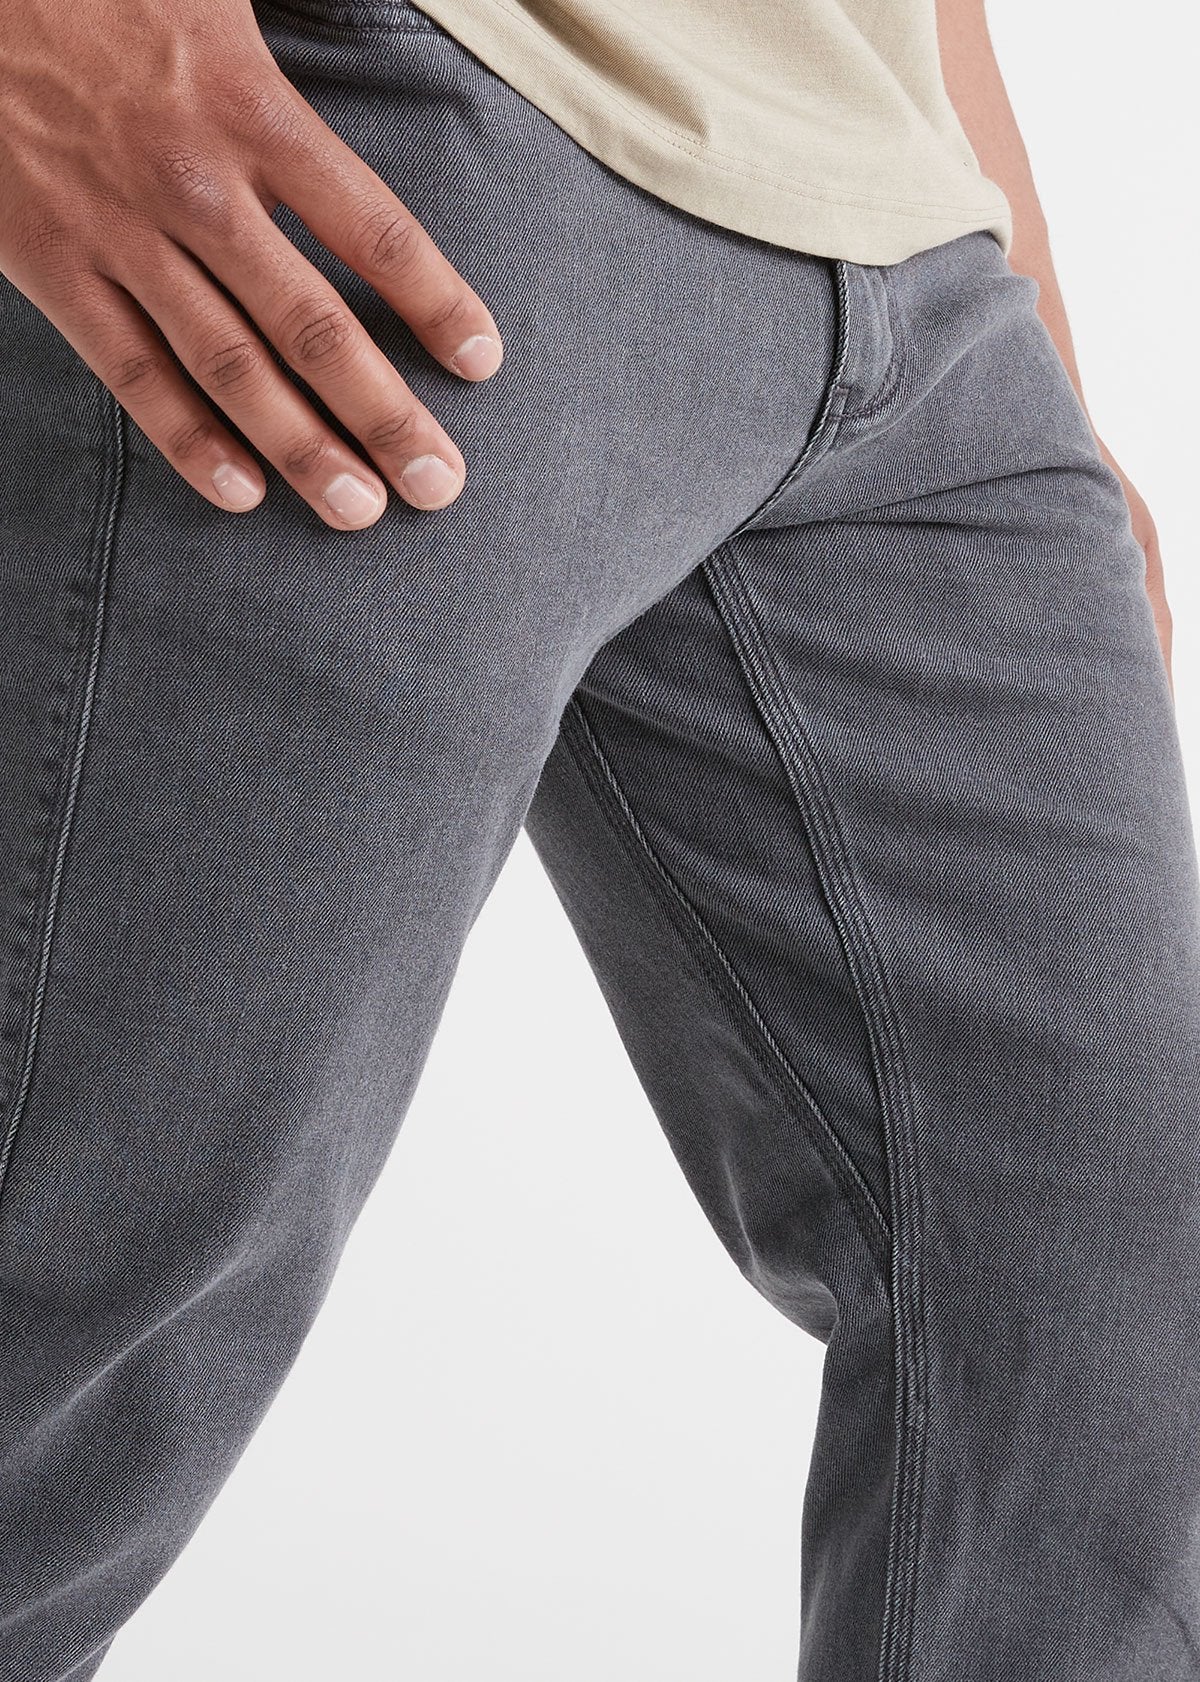 mens aged grey relaxed fit stretch jeans detail